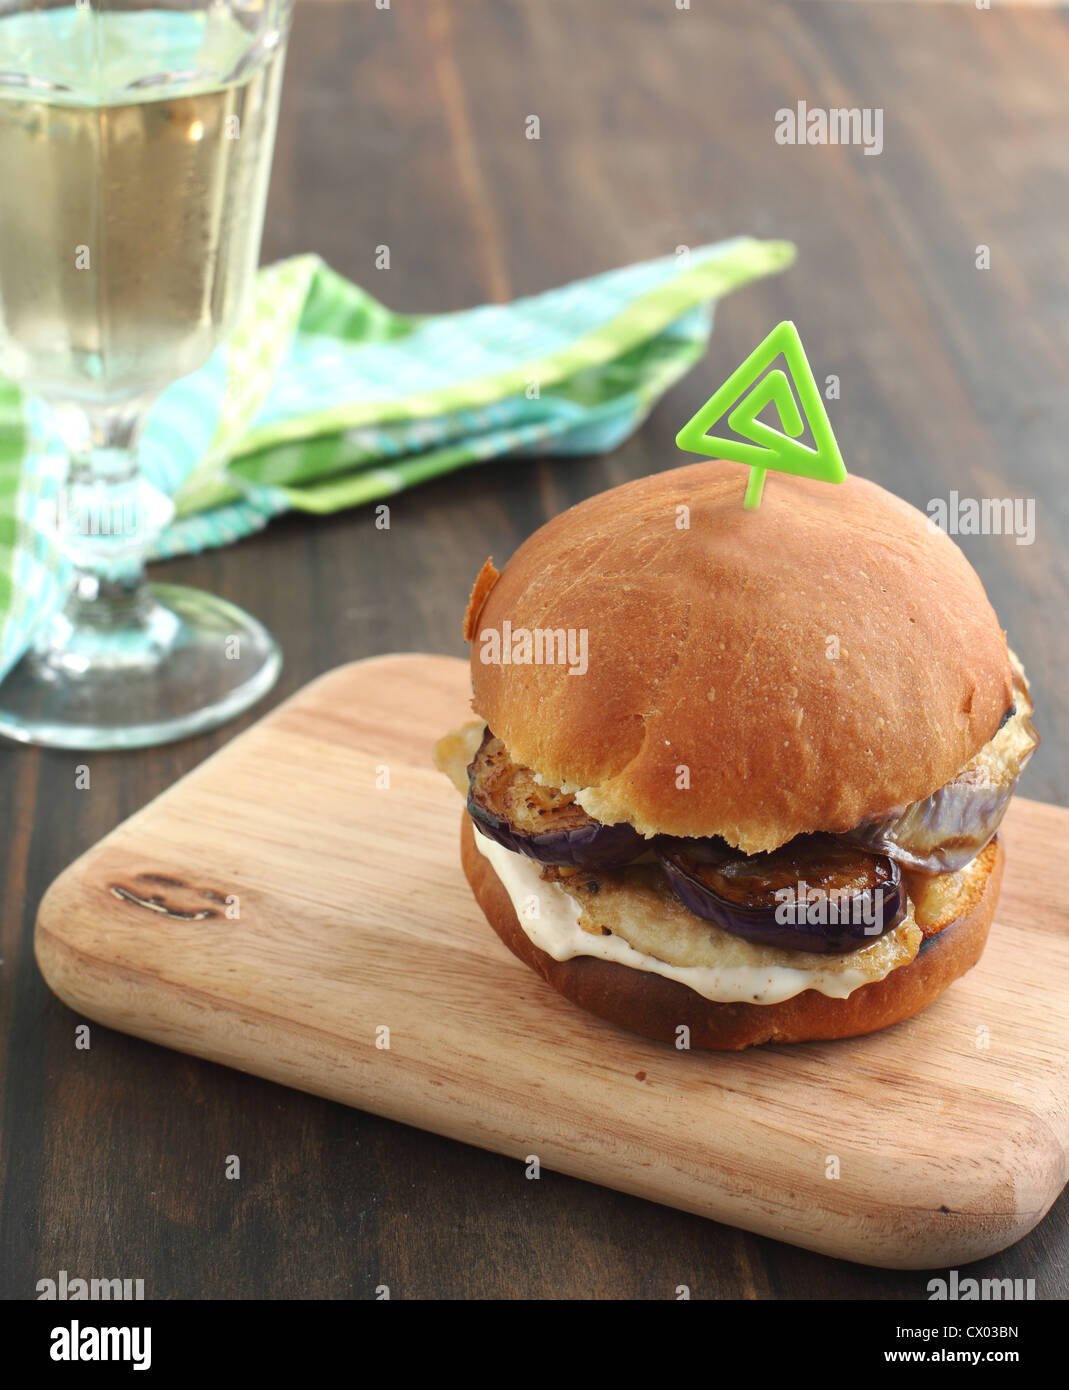 Sandwich with chicken, eggplant crisps and chipotle mayonnaise Stock Photo